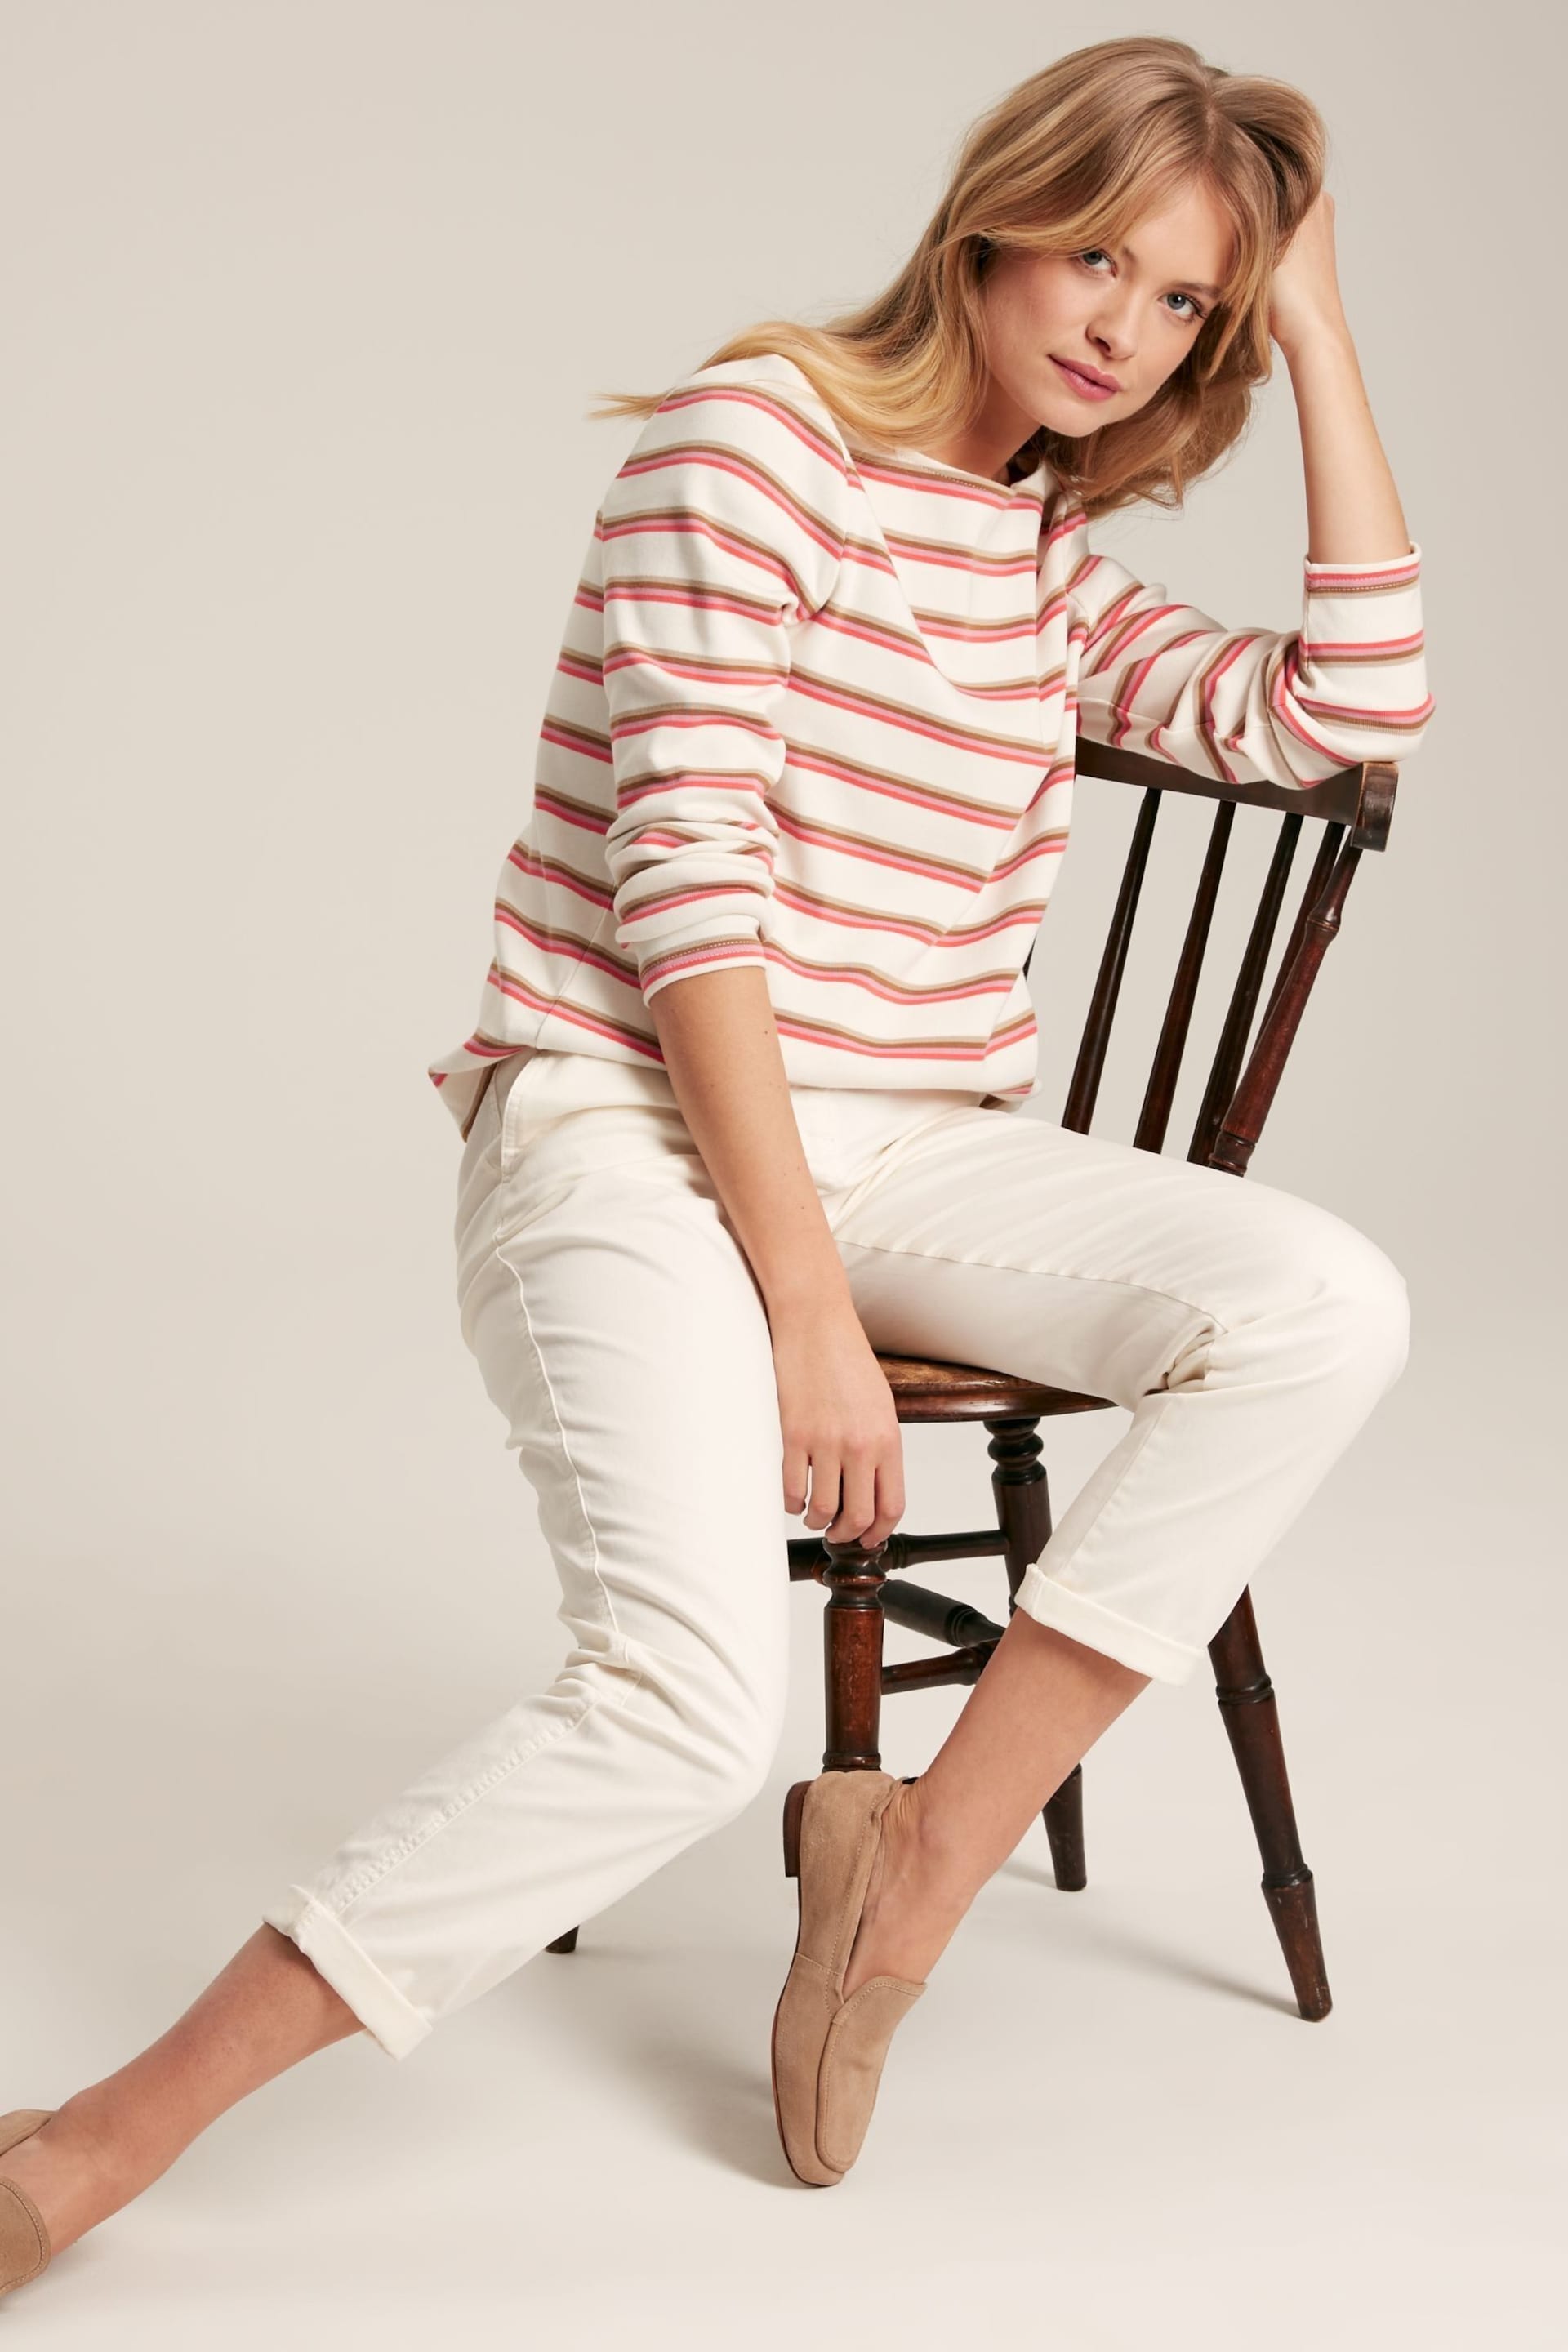 Joules New Harbour Pink & Tan Striped Boat Neck Breton Top - Image 3 of 6